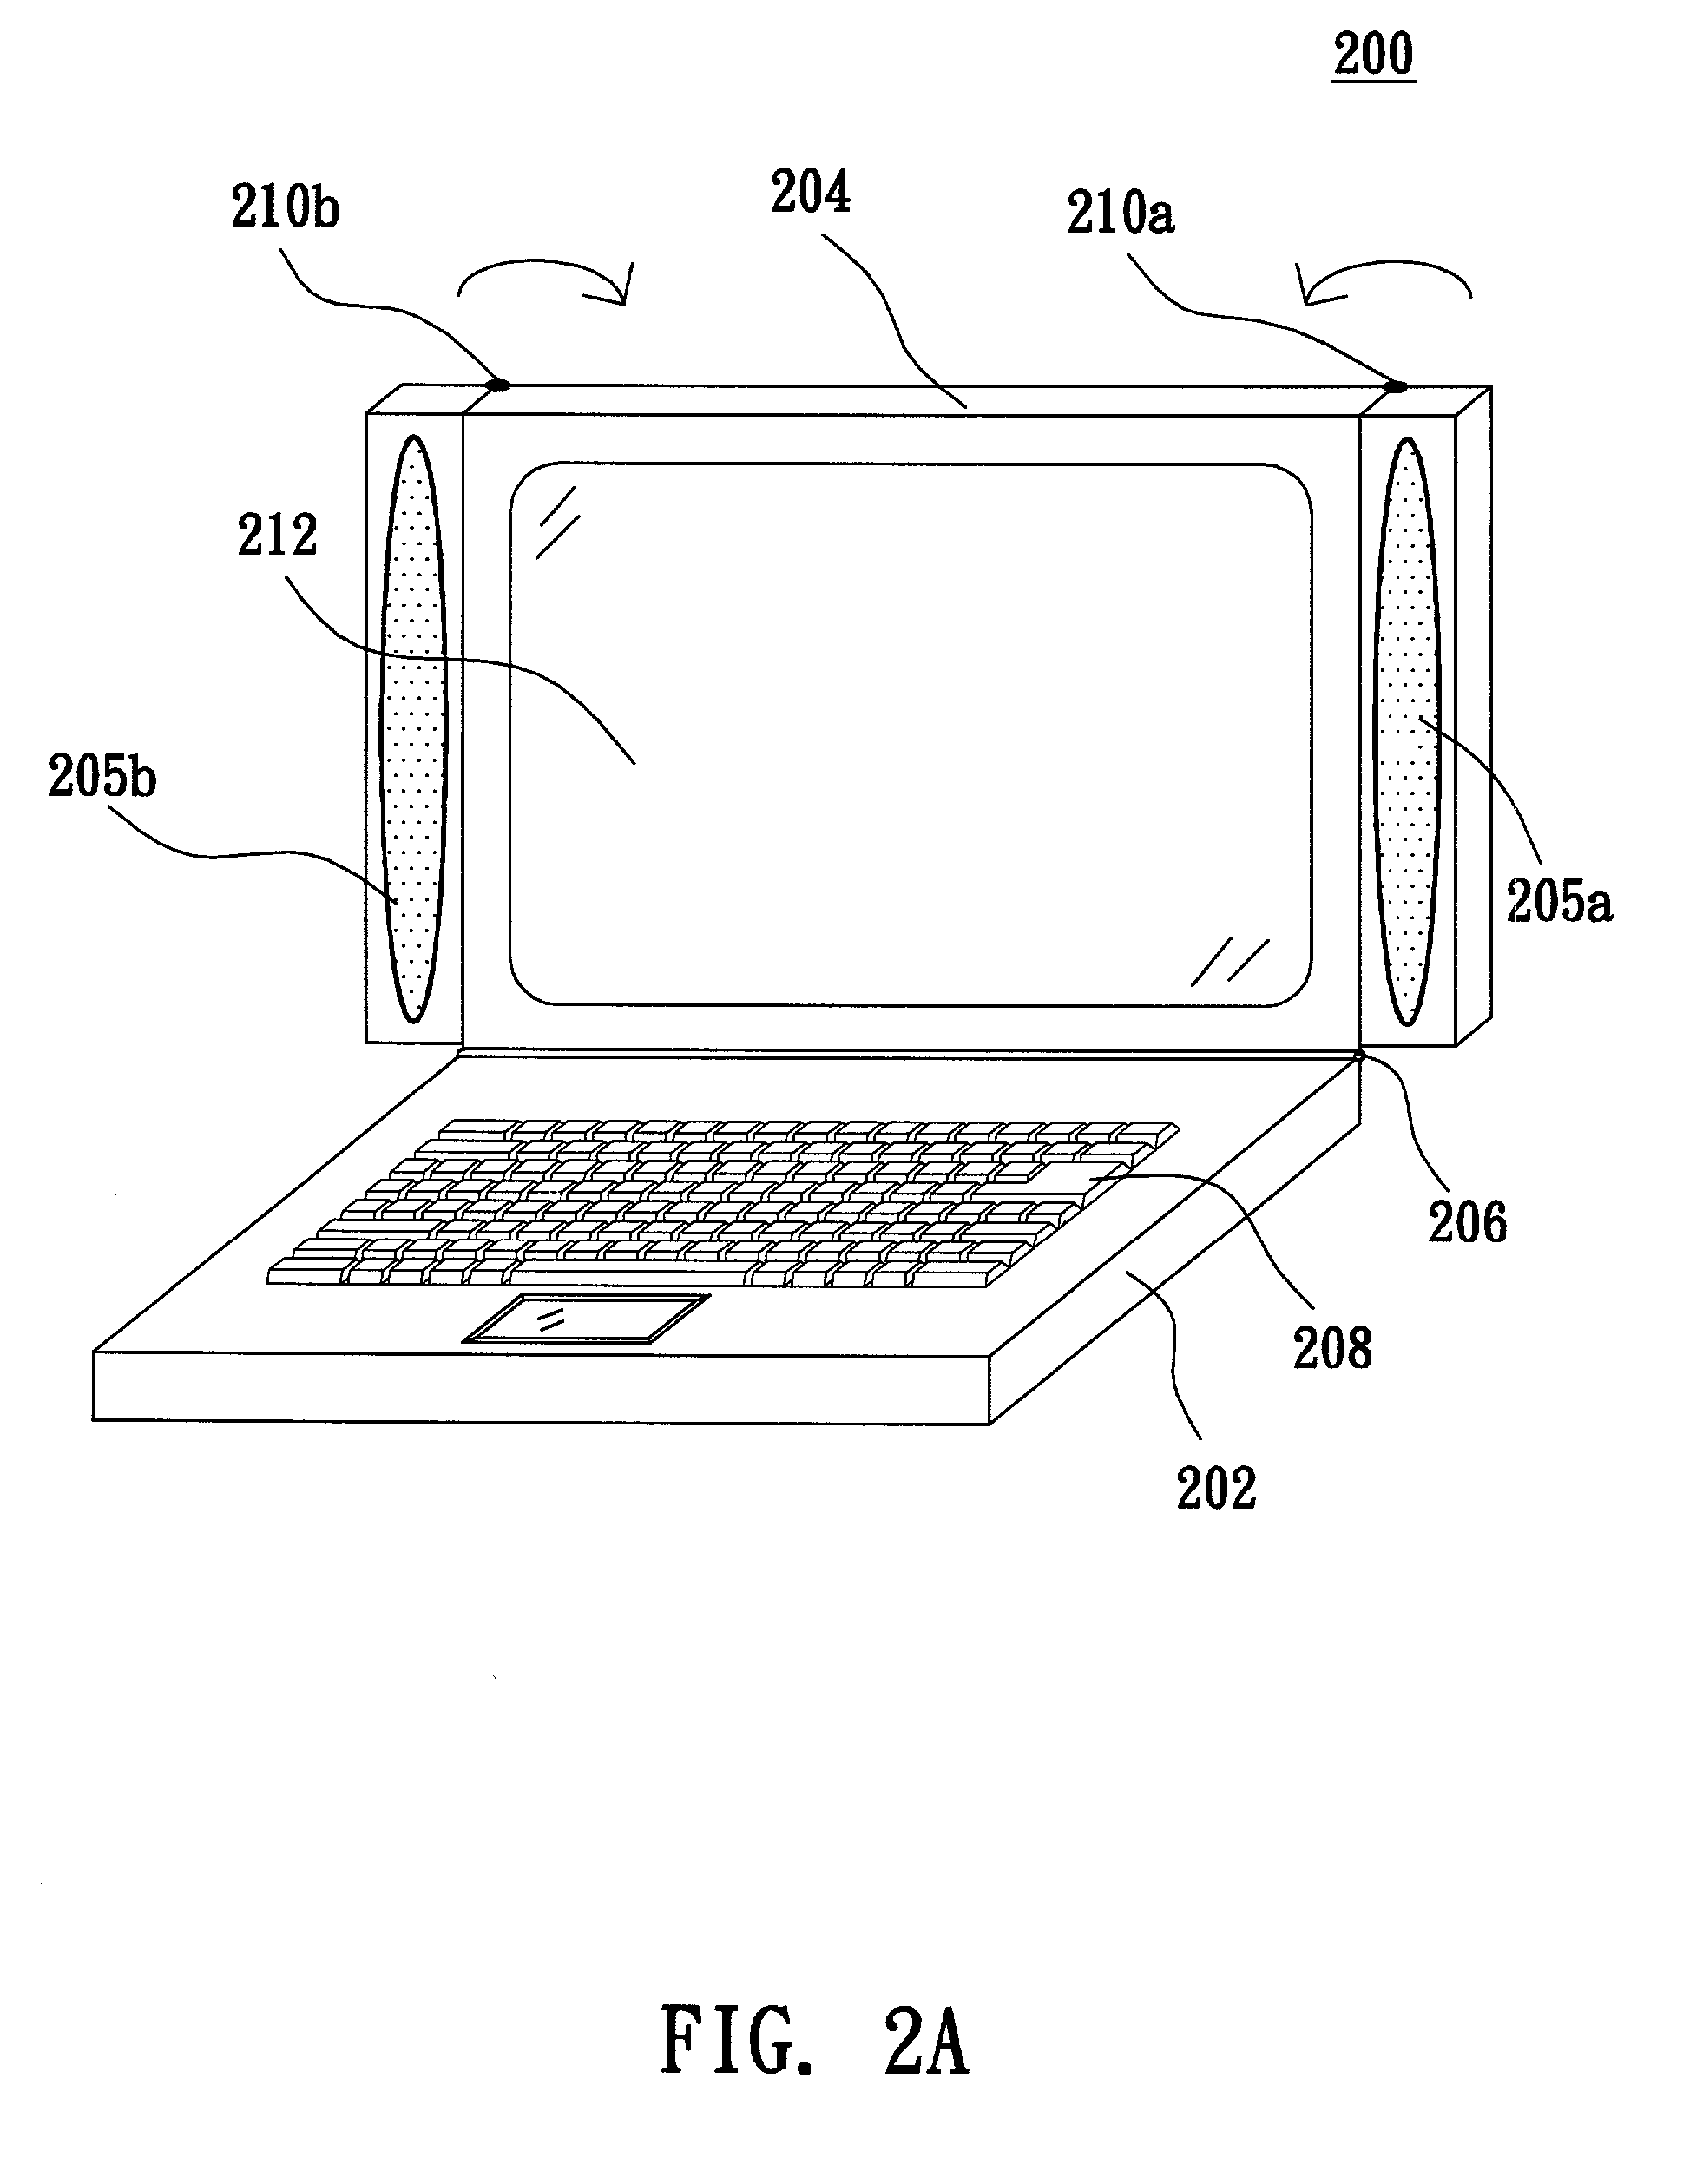 Notebook computer with folding speaker device